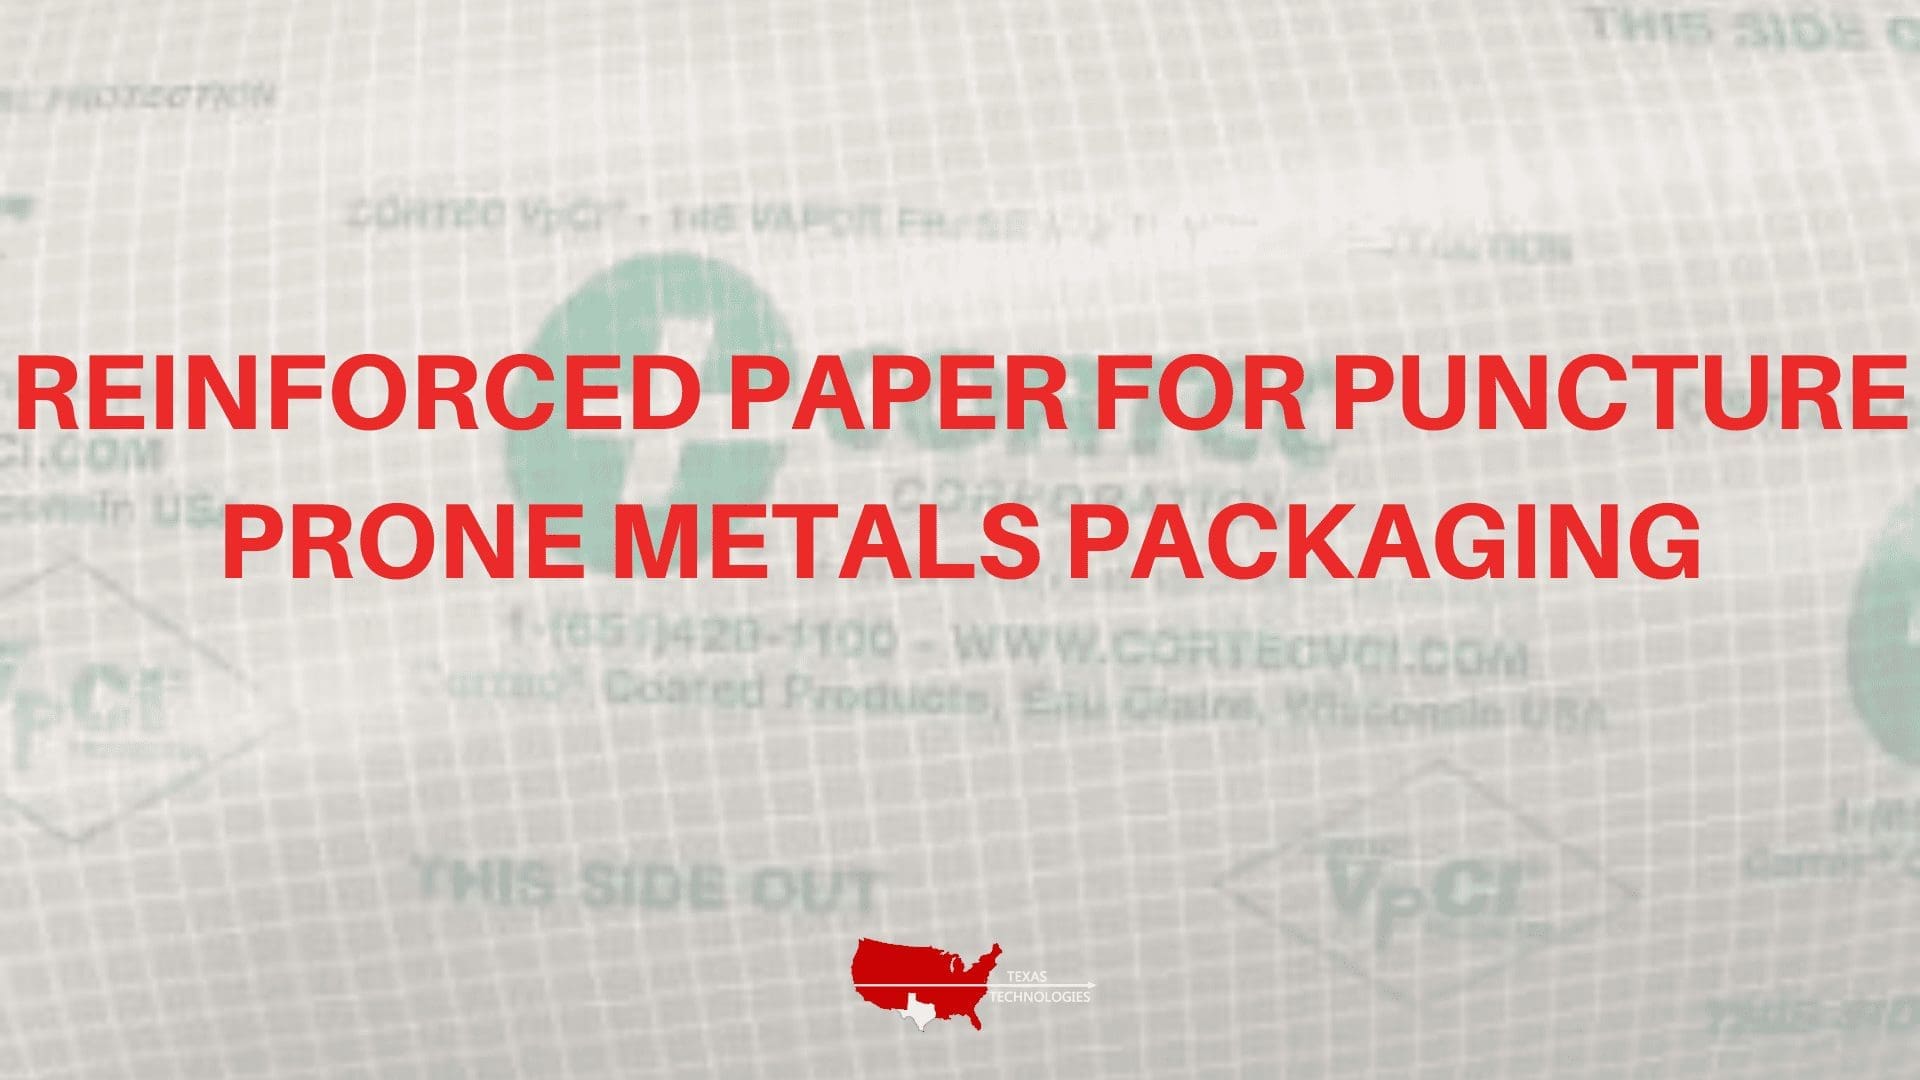 Reinforced Paper for Puncture Prone Metals Packaging